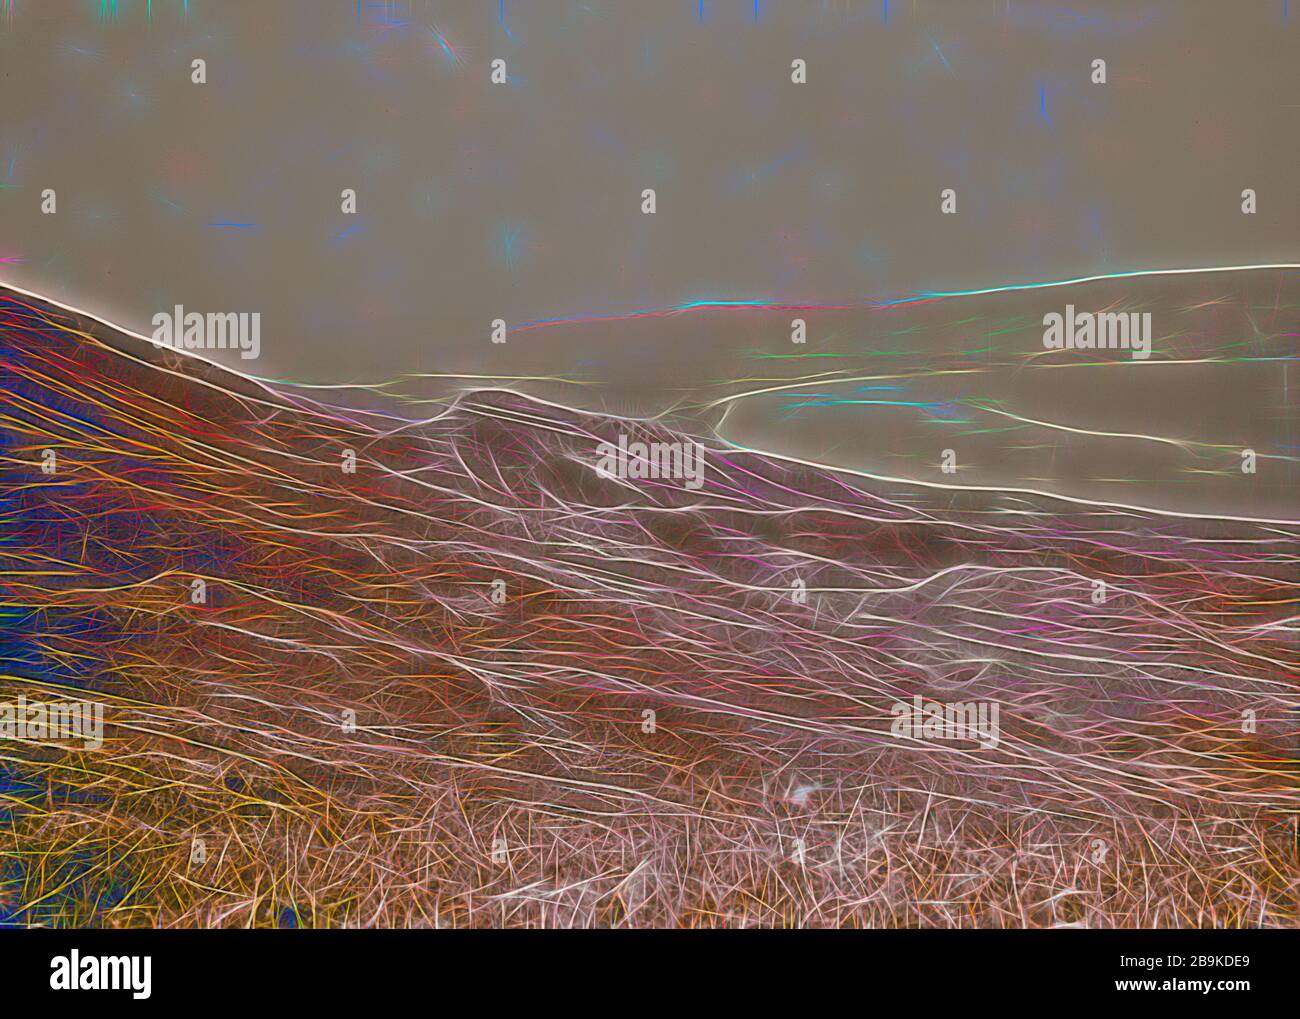 Page 2 - Gamla S High Resolution Stock Photography and Images - Alamy